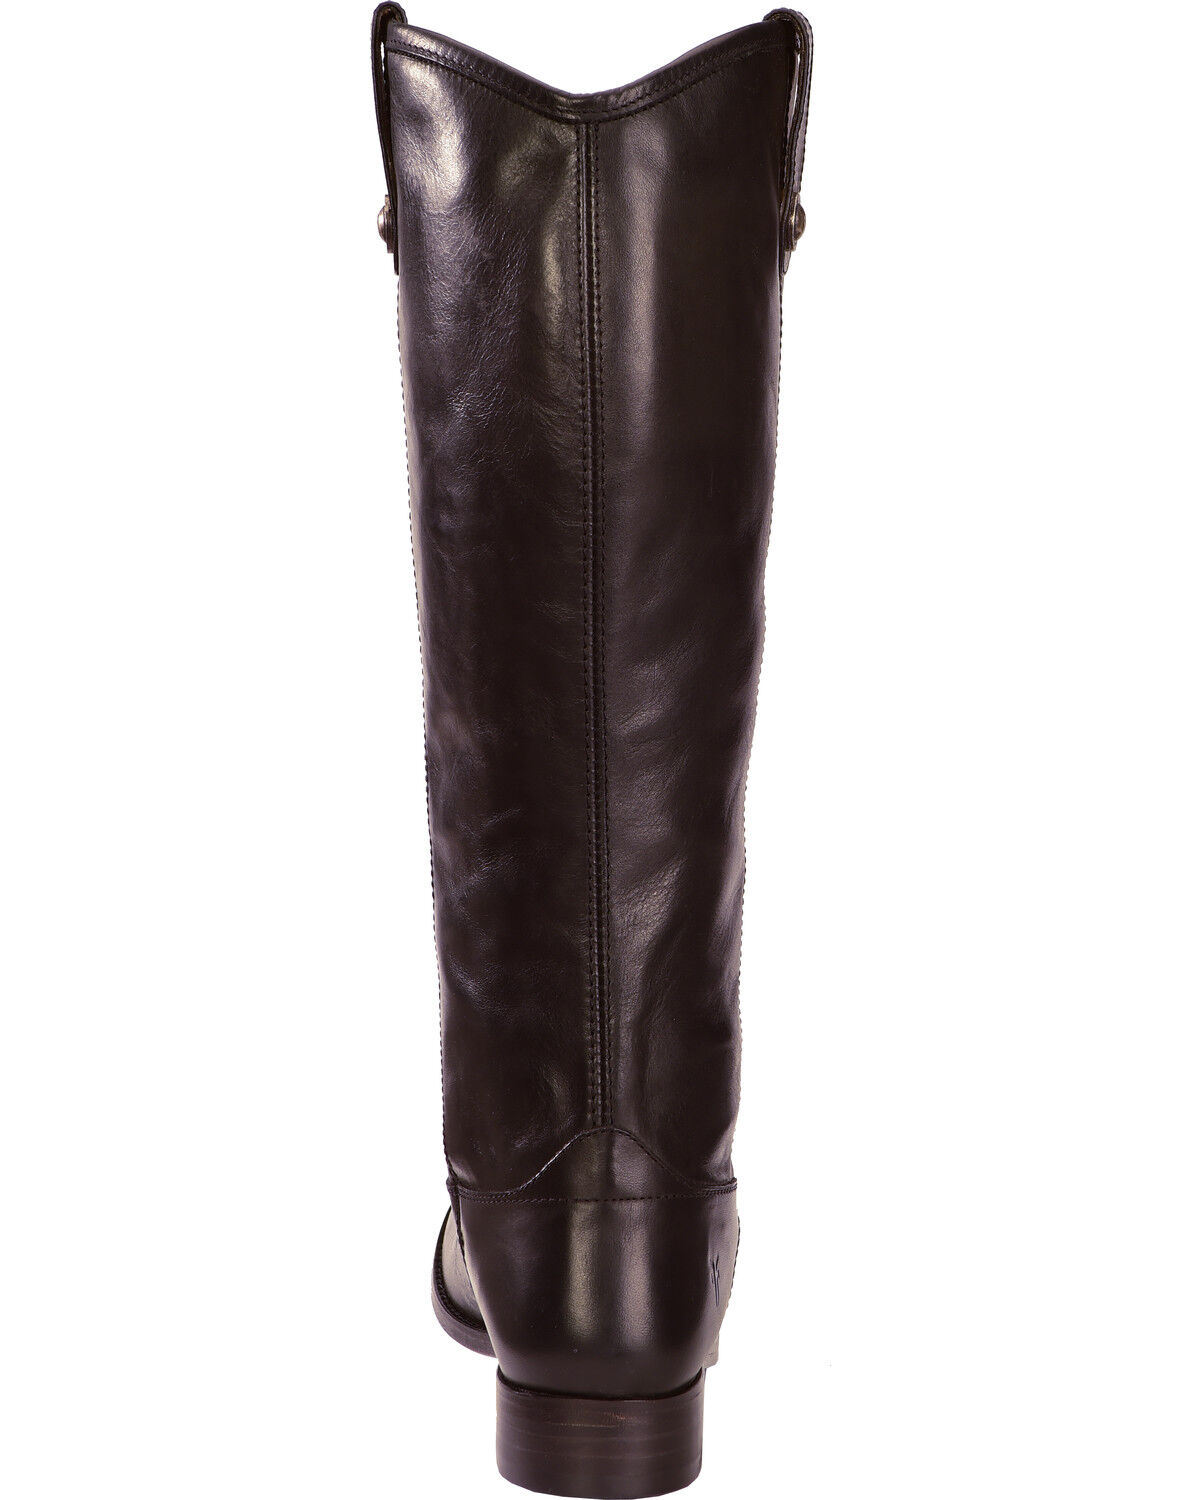 wide shaft boots